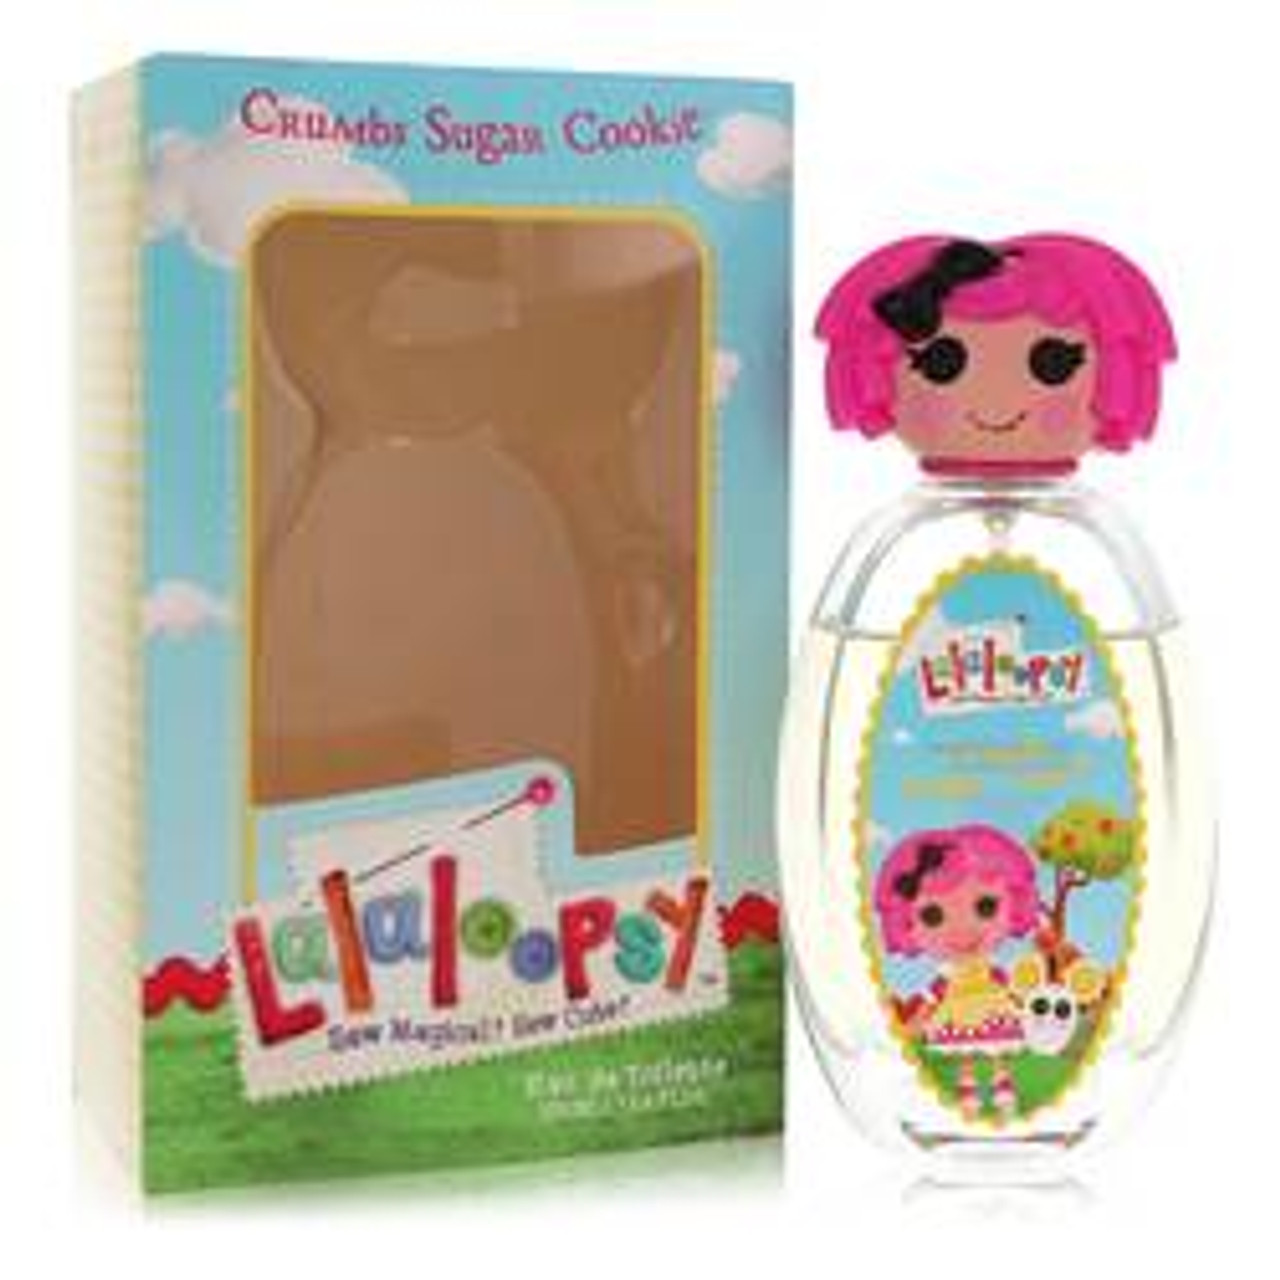 Lalaloopsy Perfume By Marmol & Son Eau De Toilette Spray (Crumbs Sugar Cookie) 3.4 oz for Women - [From 27.00 - Choose pk Qty ] - *Ships from Miami